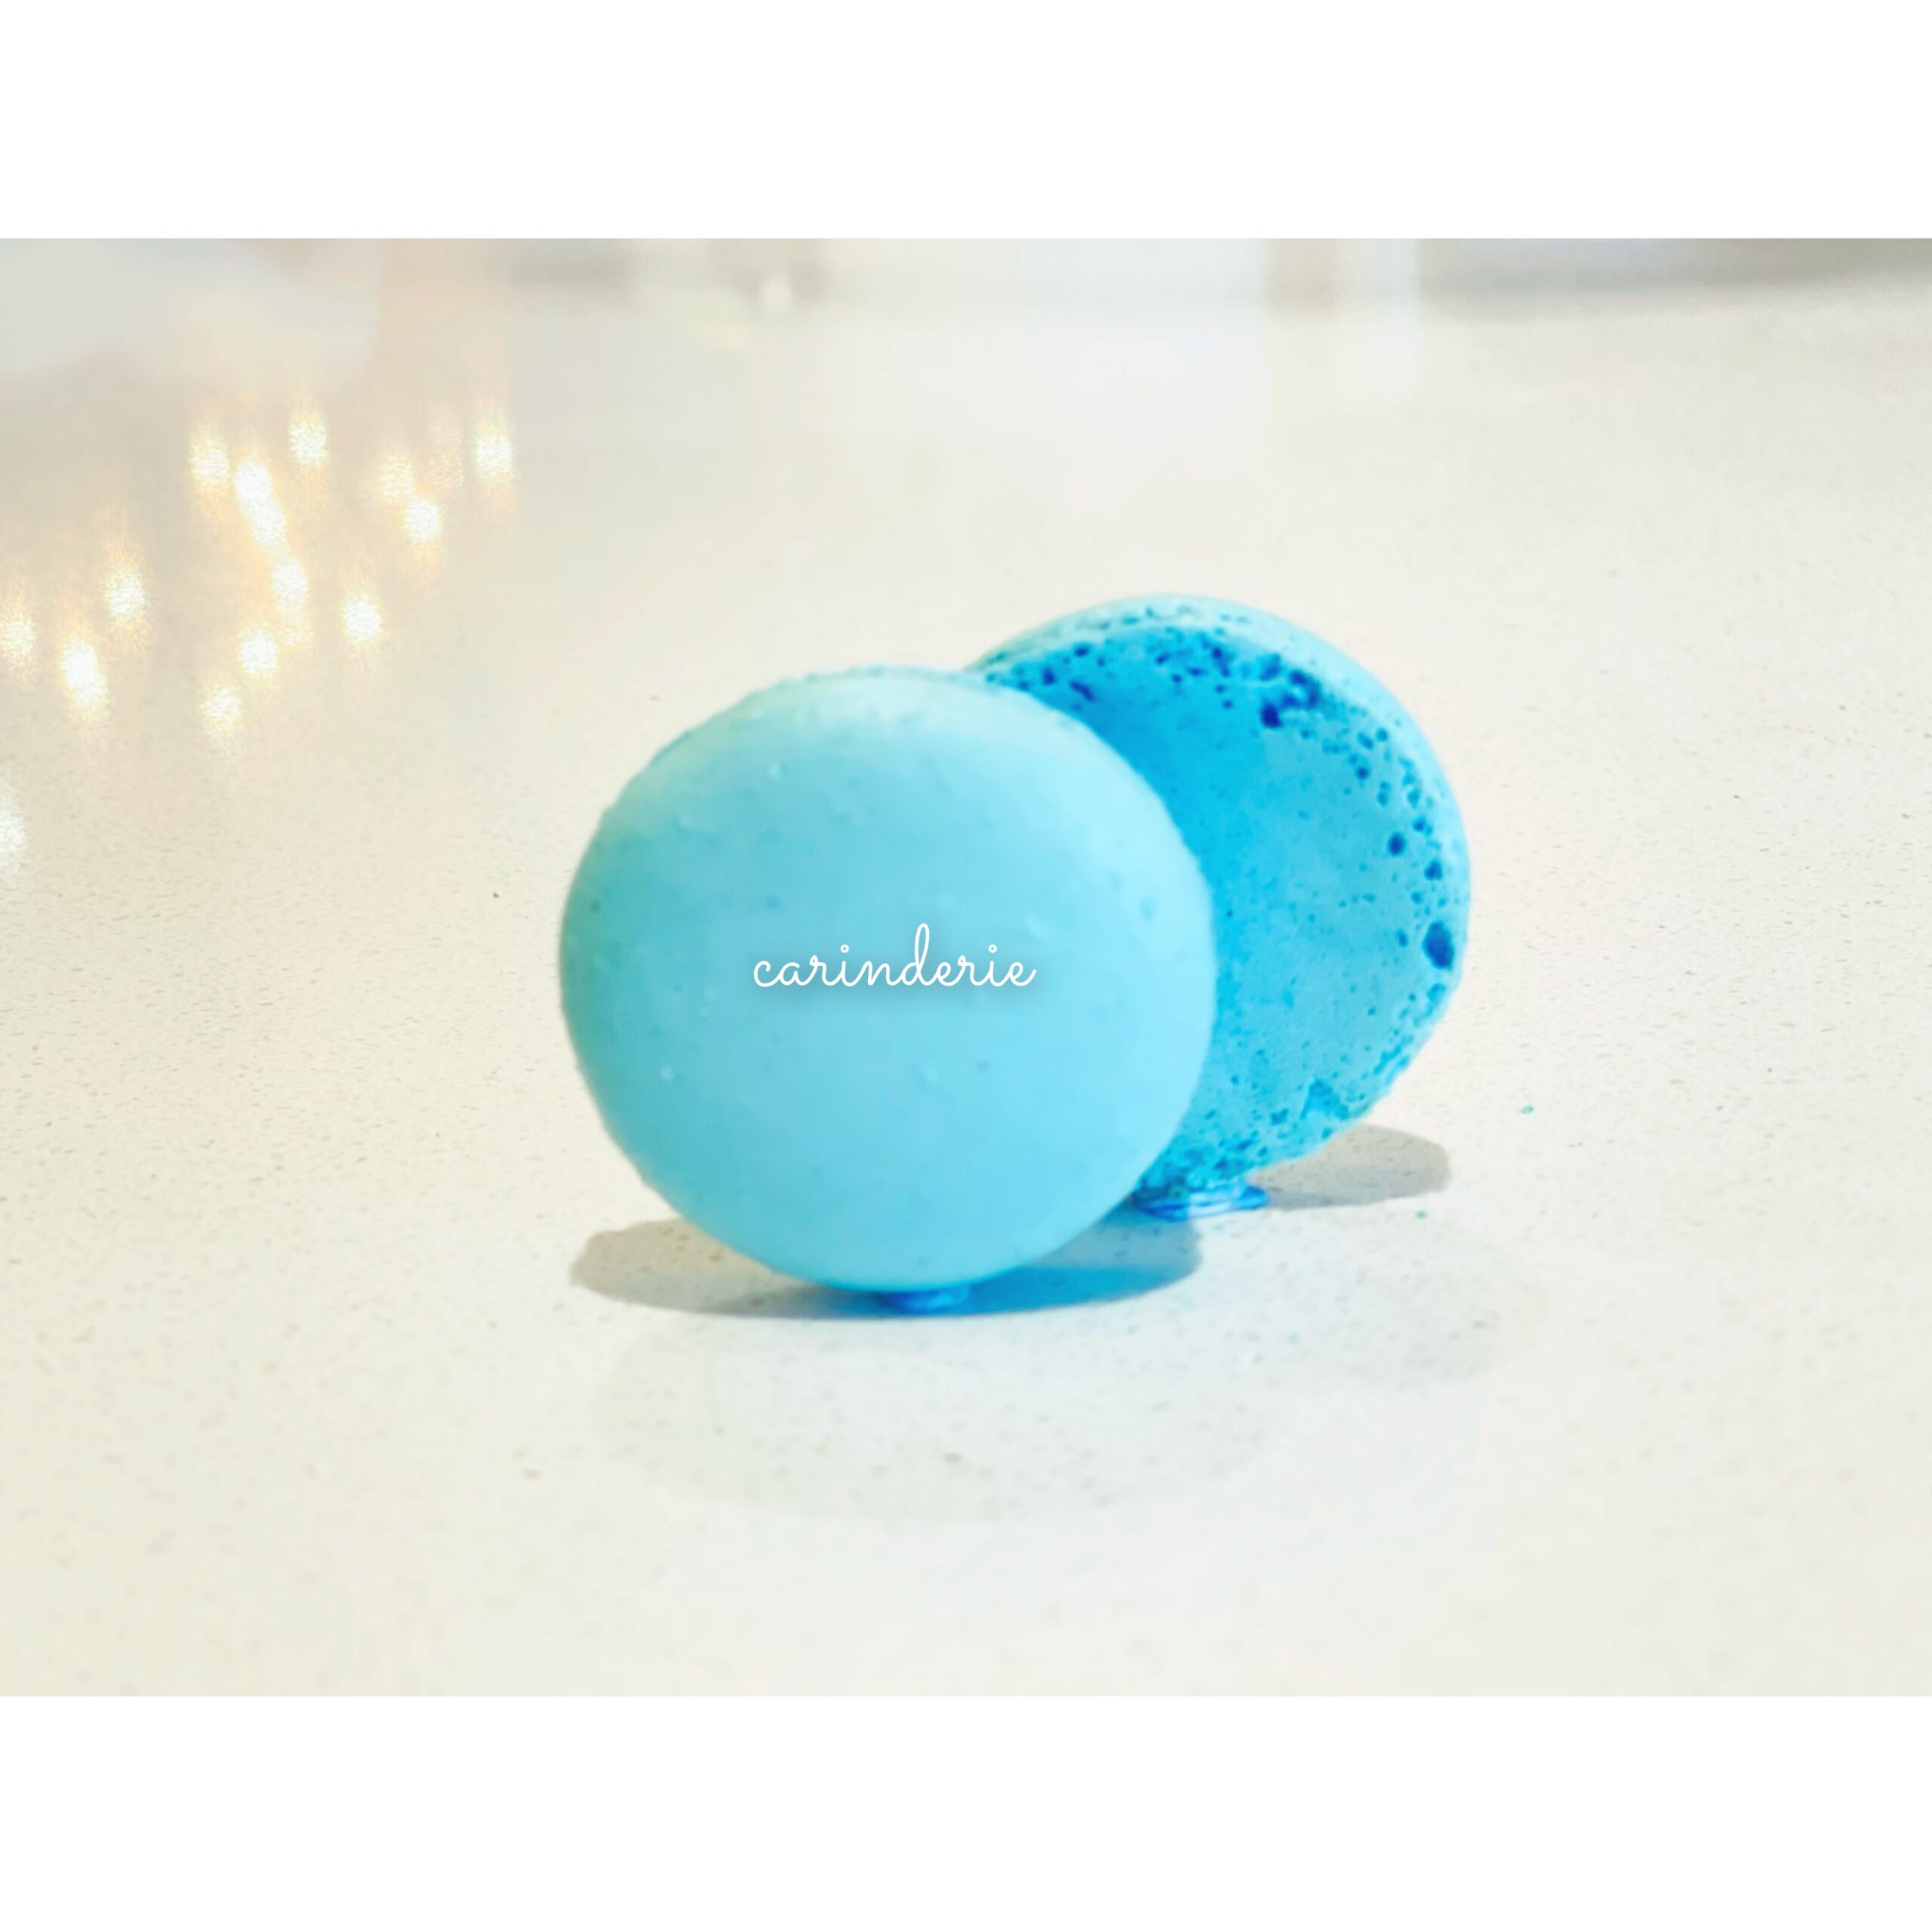 Mini Macaron Stand Bomboniere – from $4.5 (min order of 12 applies ...